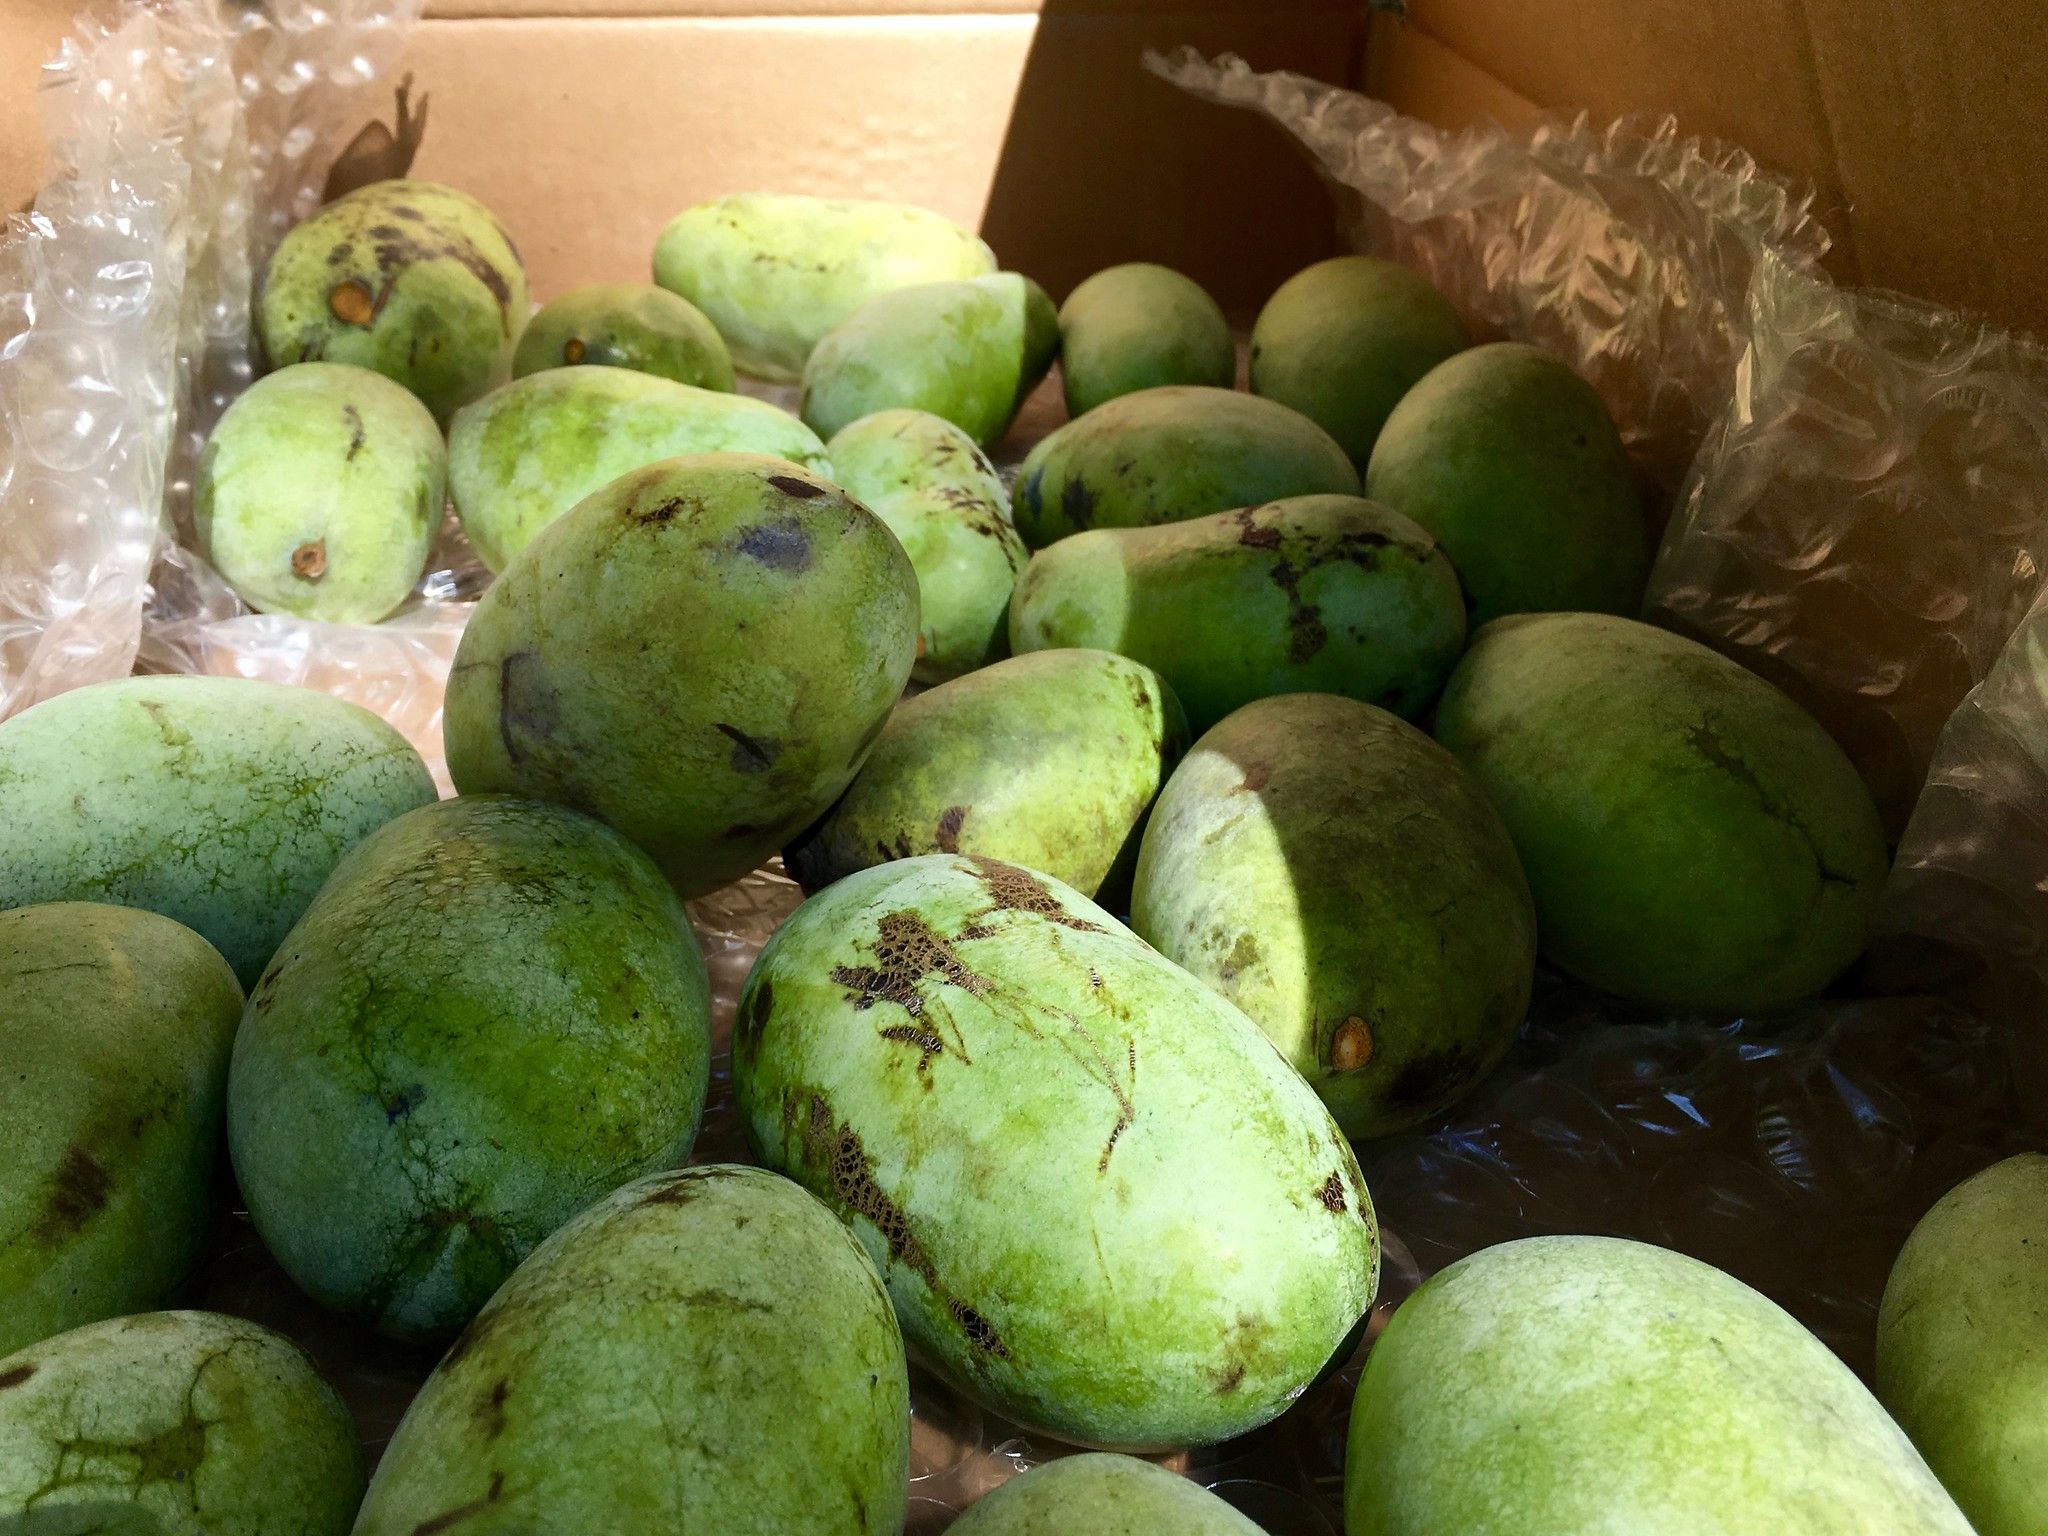 A box full of pawpaws